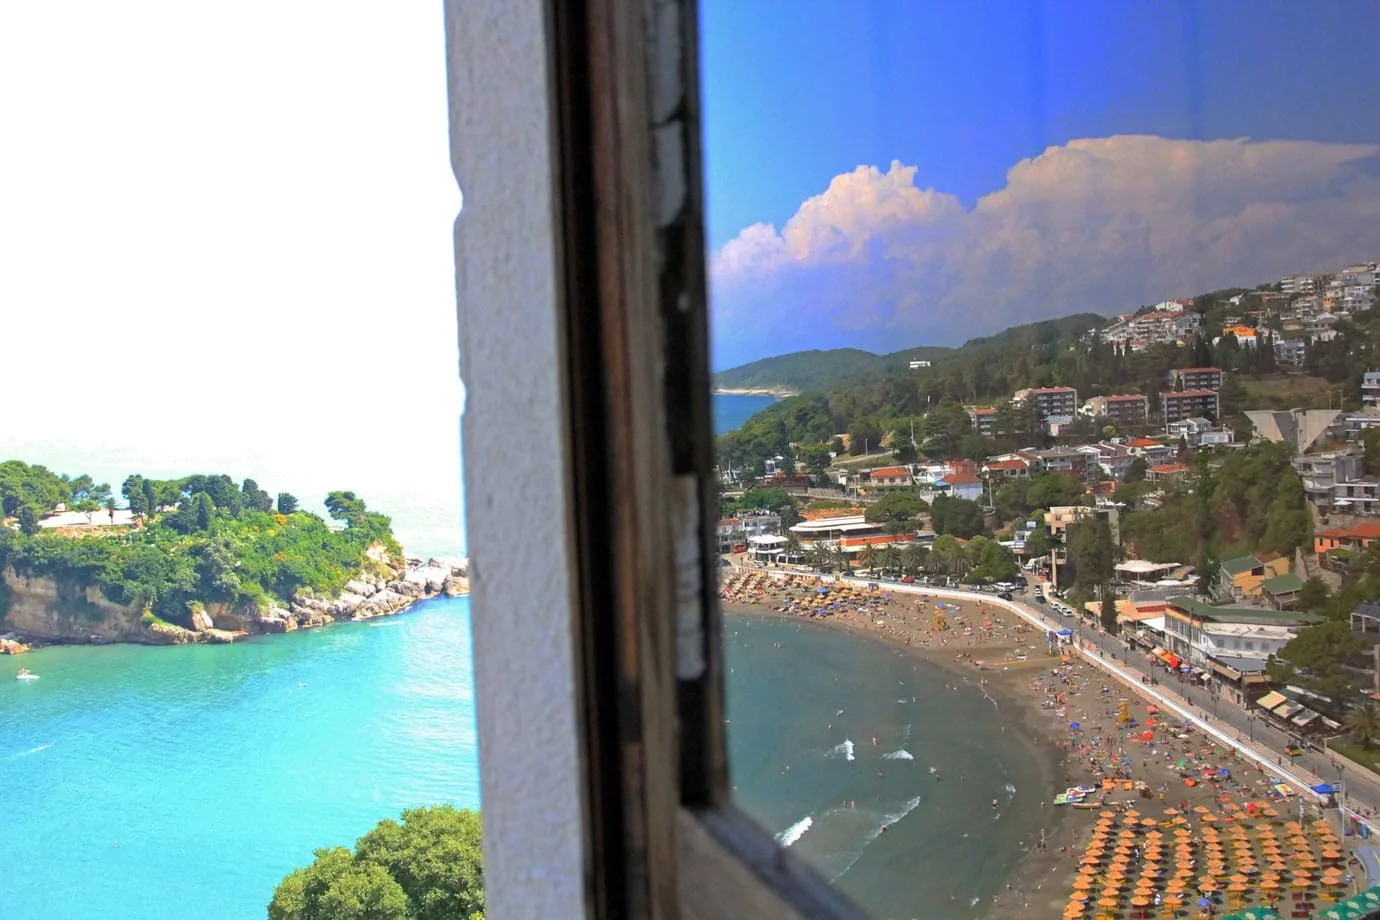 The view from the museum in Ulcinj